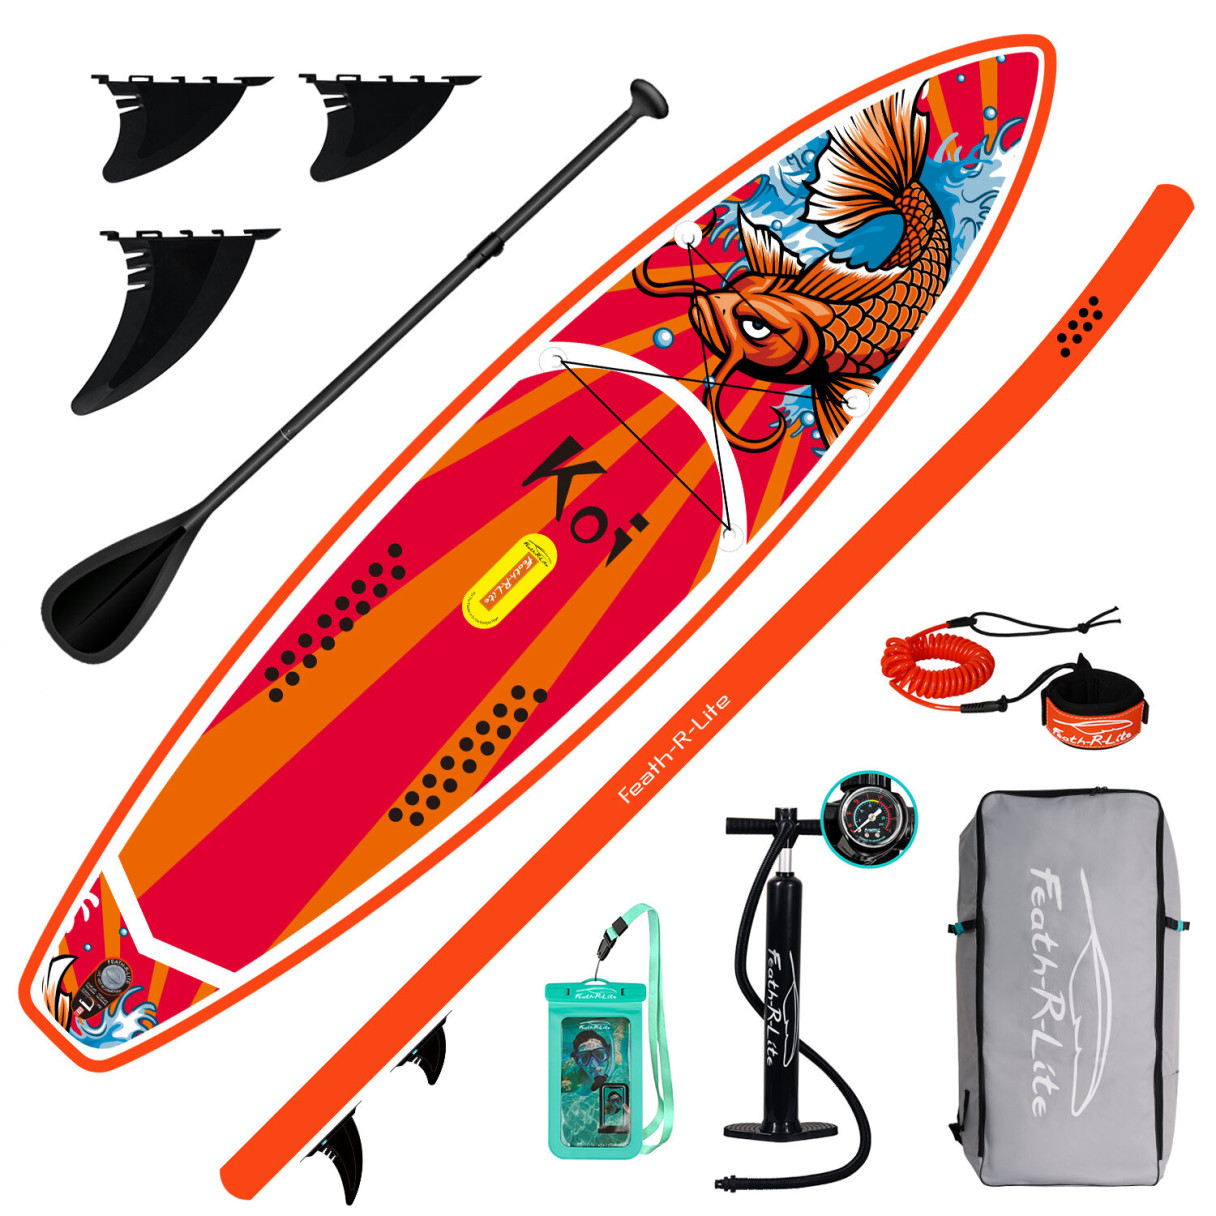 [EU Direct] FunWater Inflatable Stand Up Paddle Board Surfboard Complete Paddleboard Accessories Adjustable Paddle, Pump, ISUP Travel Backpack, Leash, Waterproof Bag, Adult Paddle Board SUPFR01E SUPFR02E